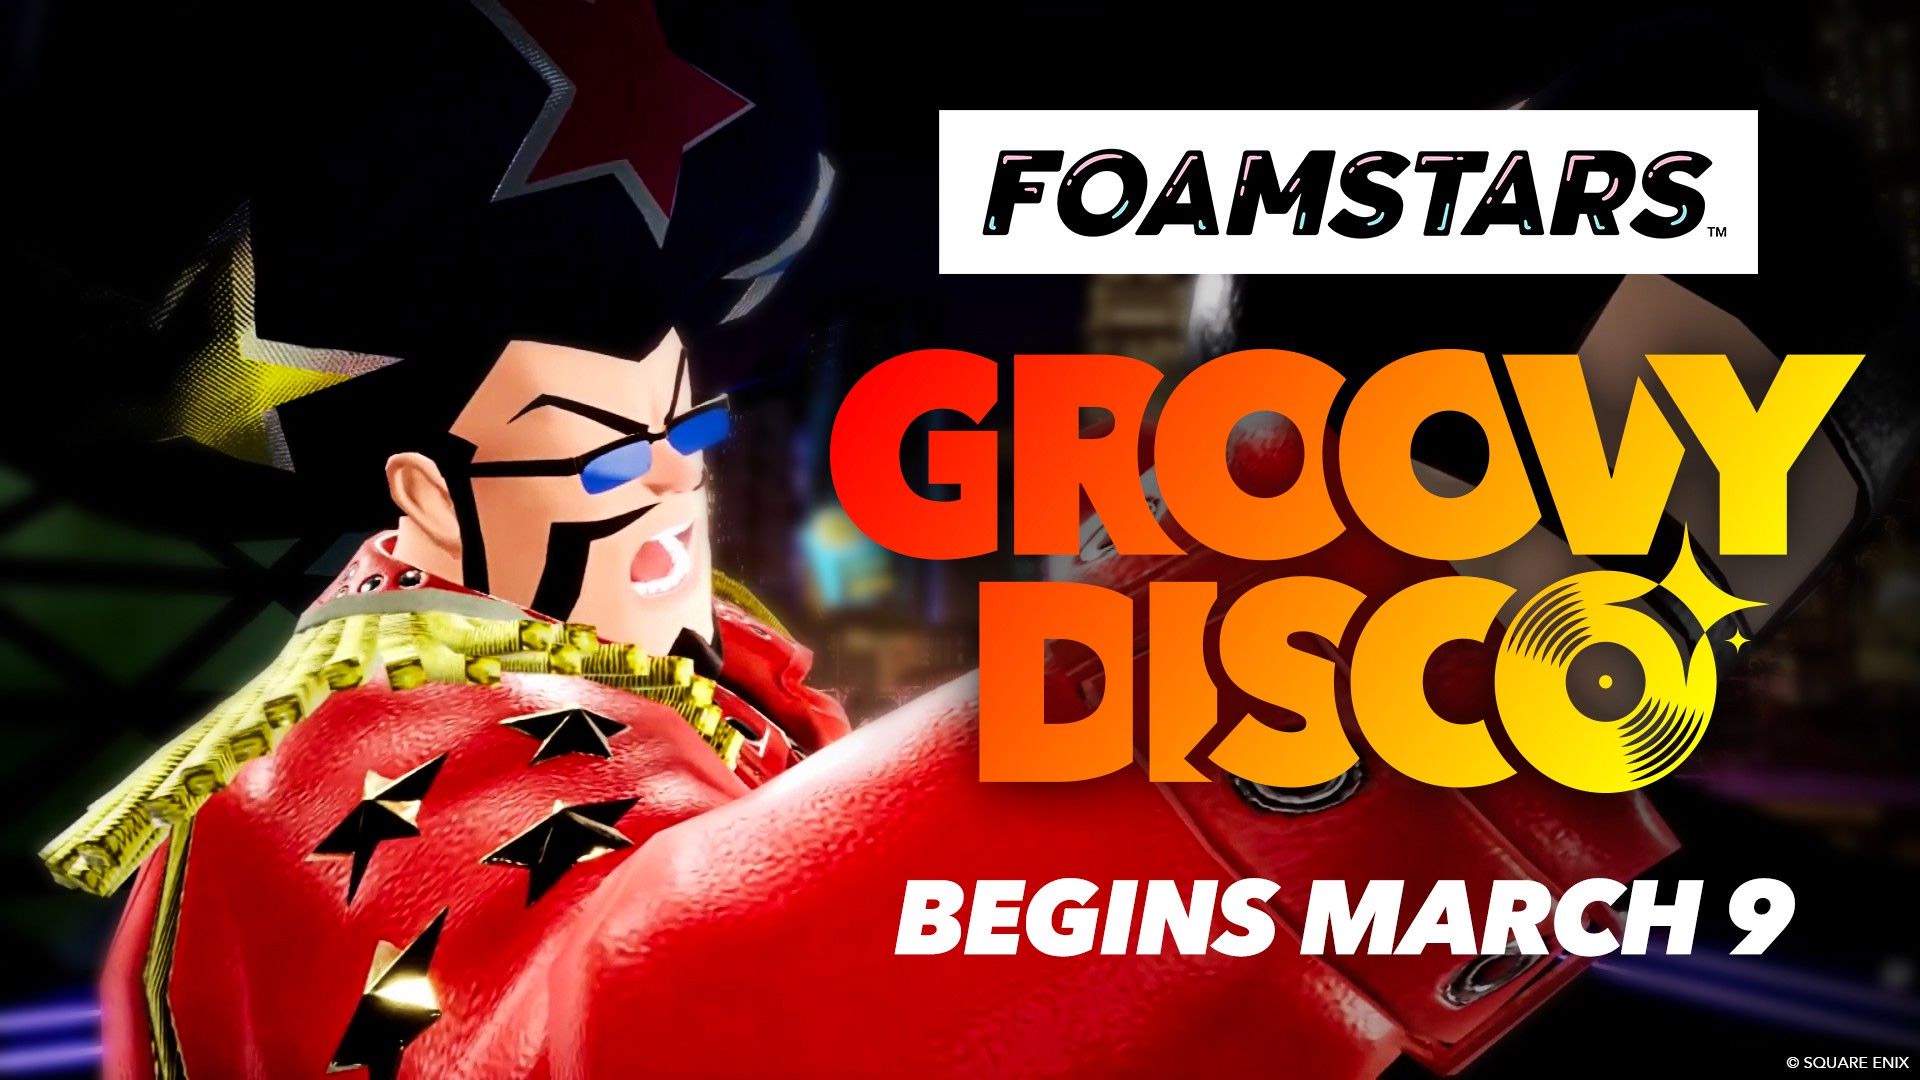 The brand new FOAMSTAR Coiff Guy is shown behind text reading GROOVY DISCO – BEGINS MARCH 9